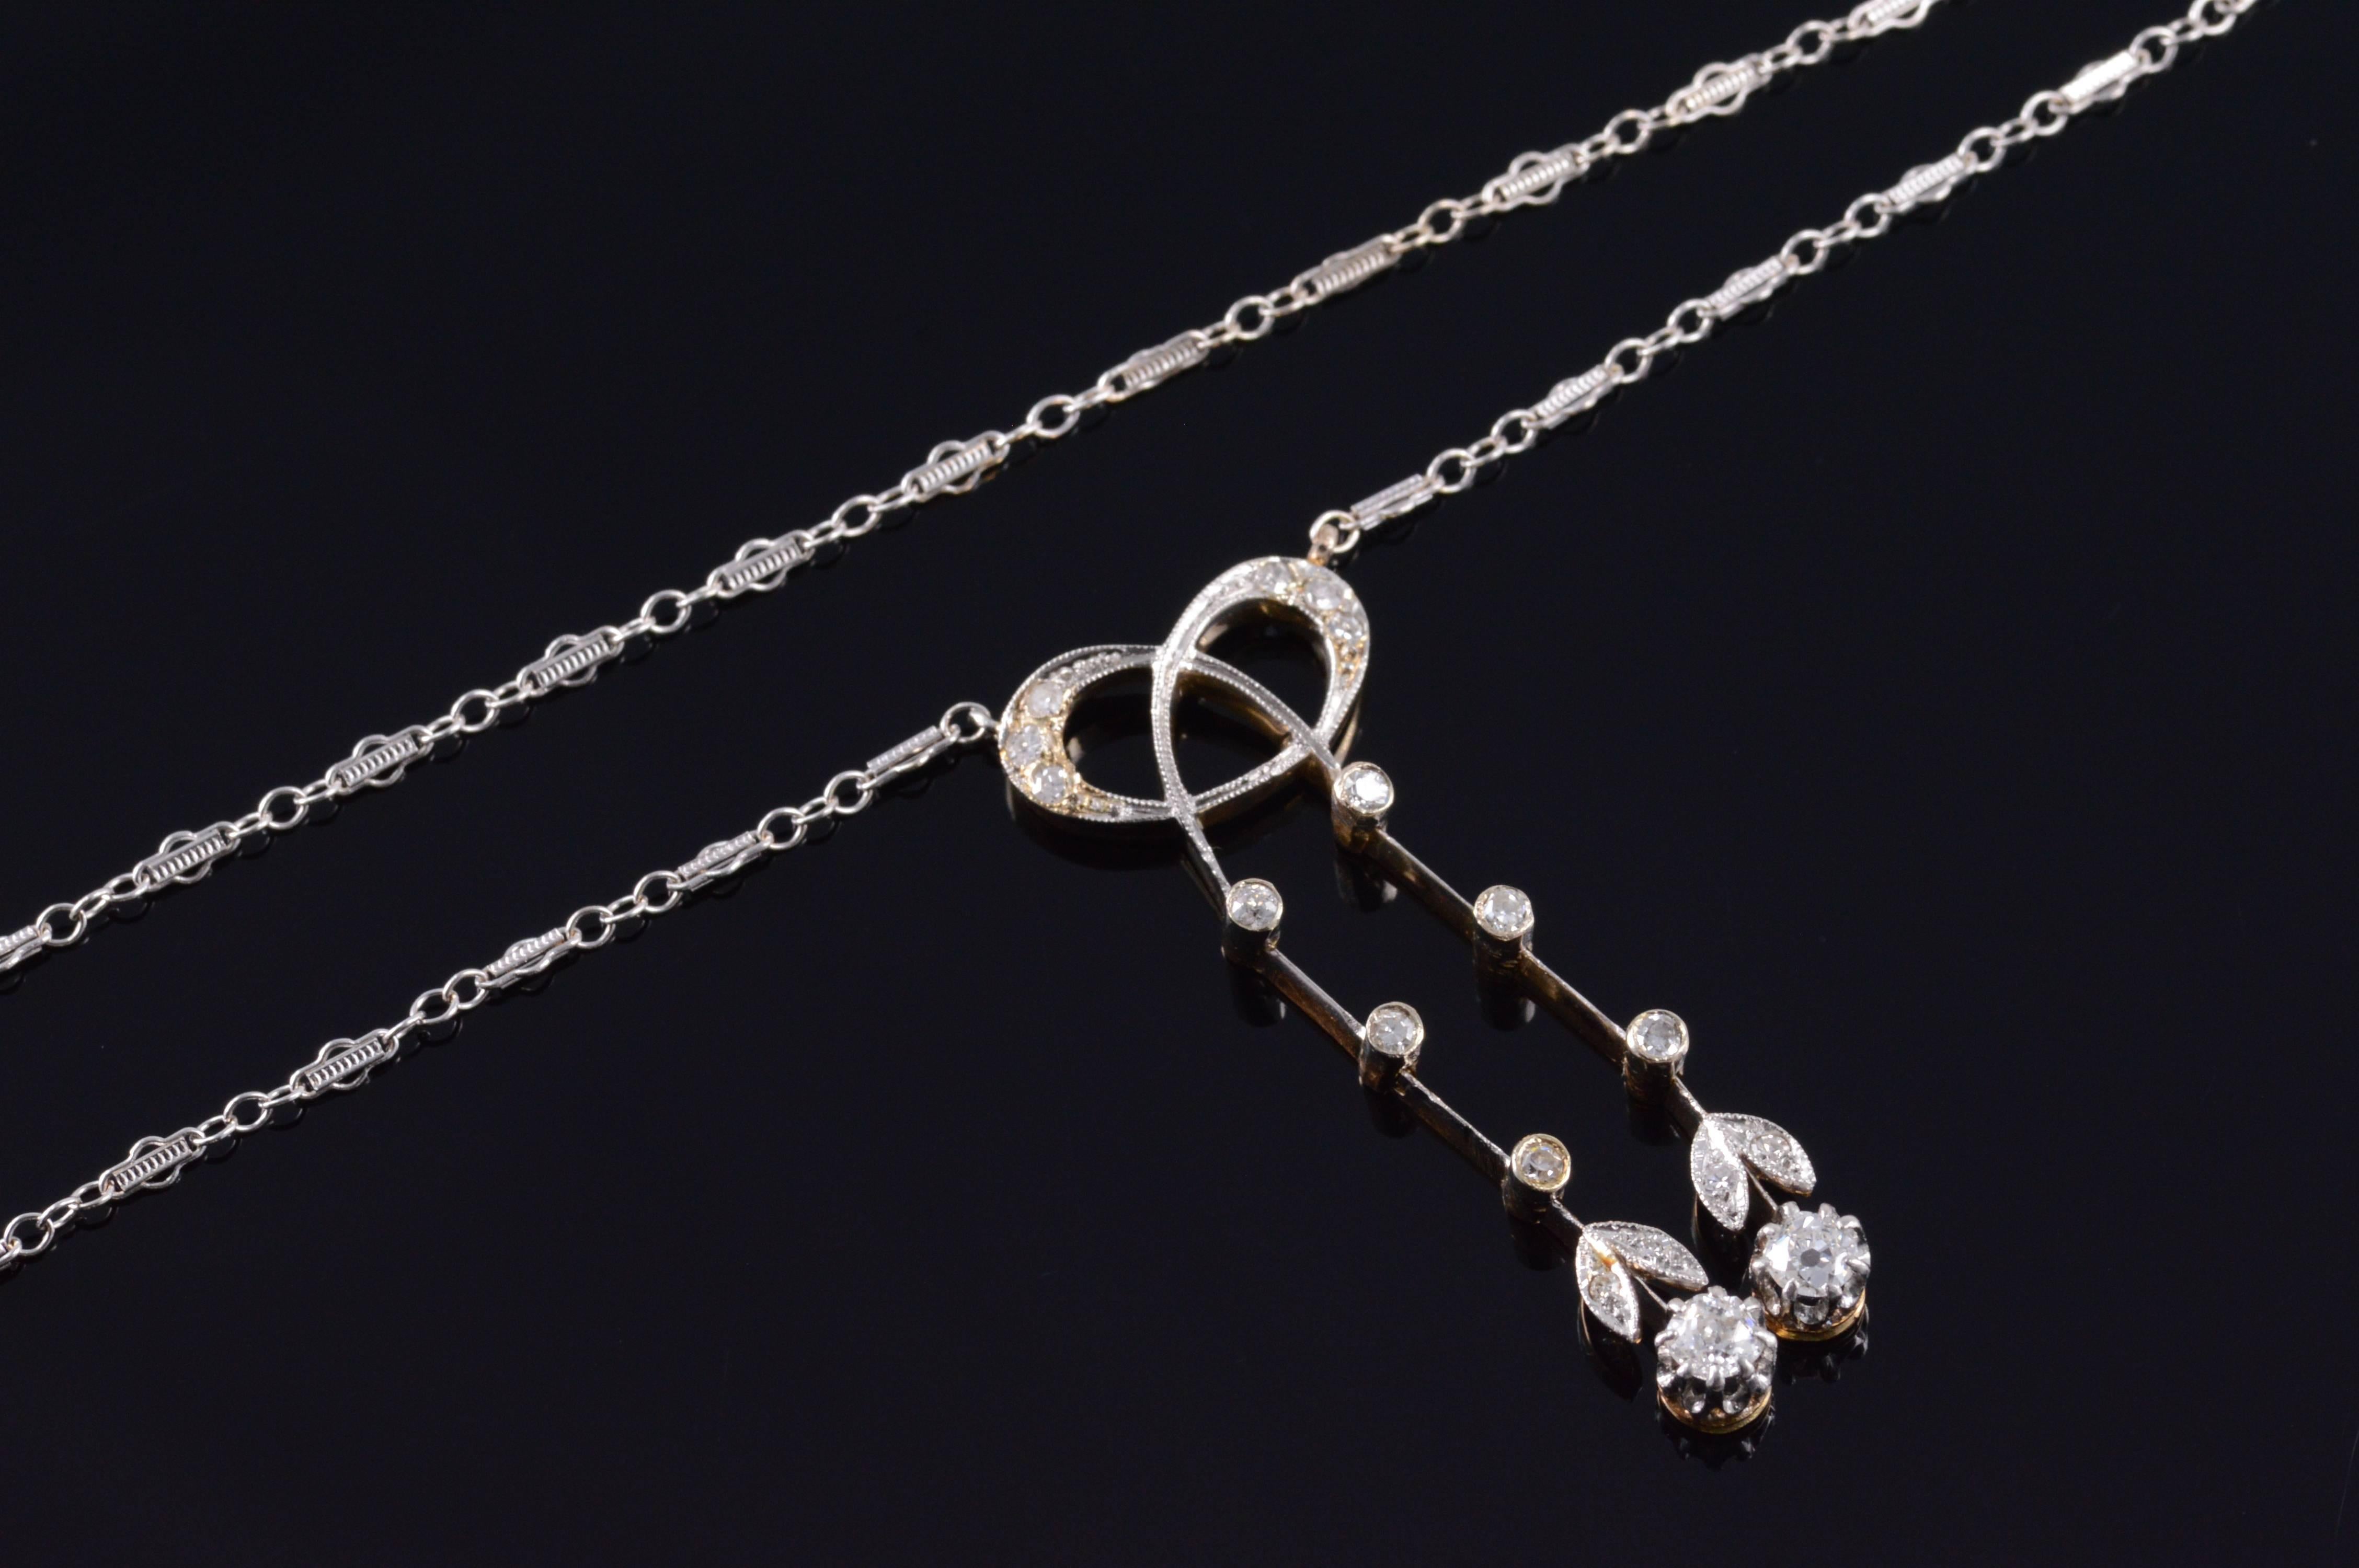 Diamond Edwardian Ribbon Necklace. Hand made detailed ribbon necklace 0.65 Ctw old mine cut diamonds. The necklace currently measures 15" and is made out of 14k white gold! 